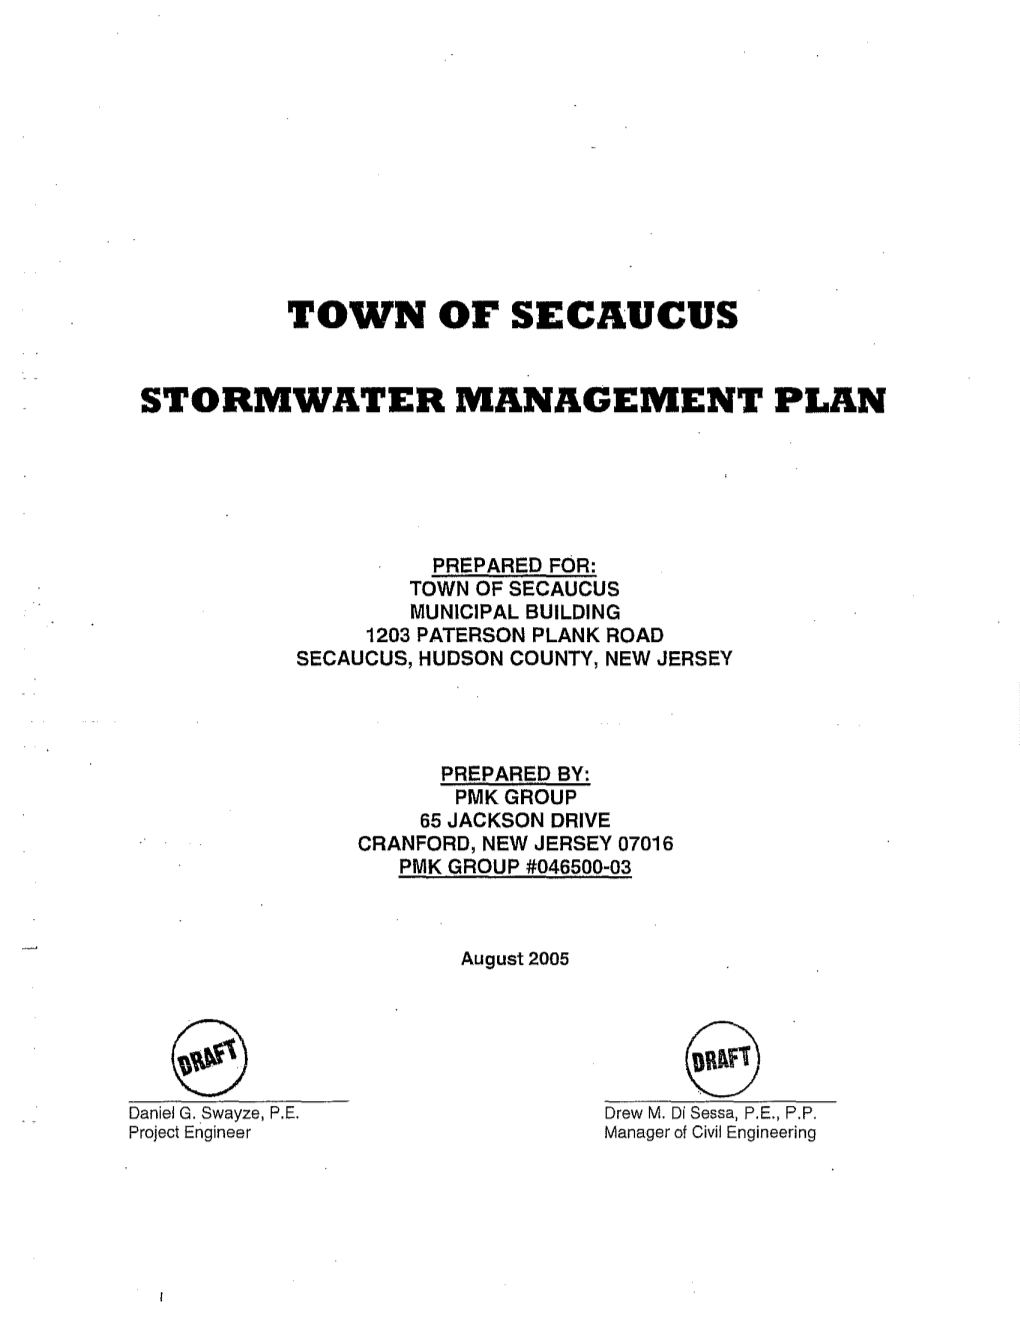 Municipal Stormwater Management Plan (MSWMP) Documents the Strategy for the Town of Secaucus (Town) to Address Stormwater-Related Impacts